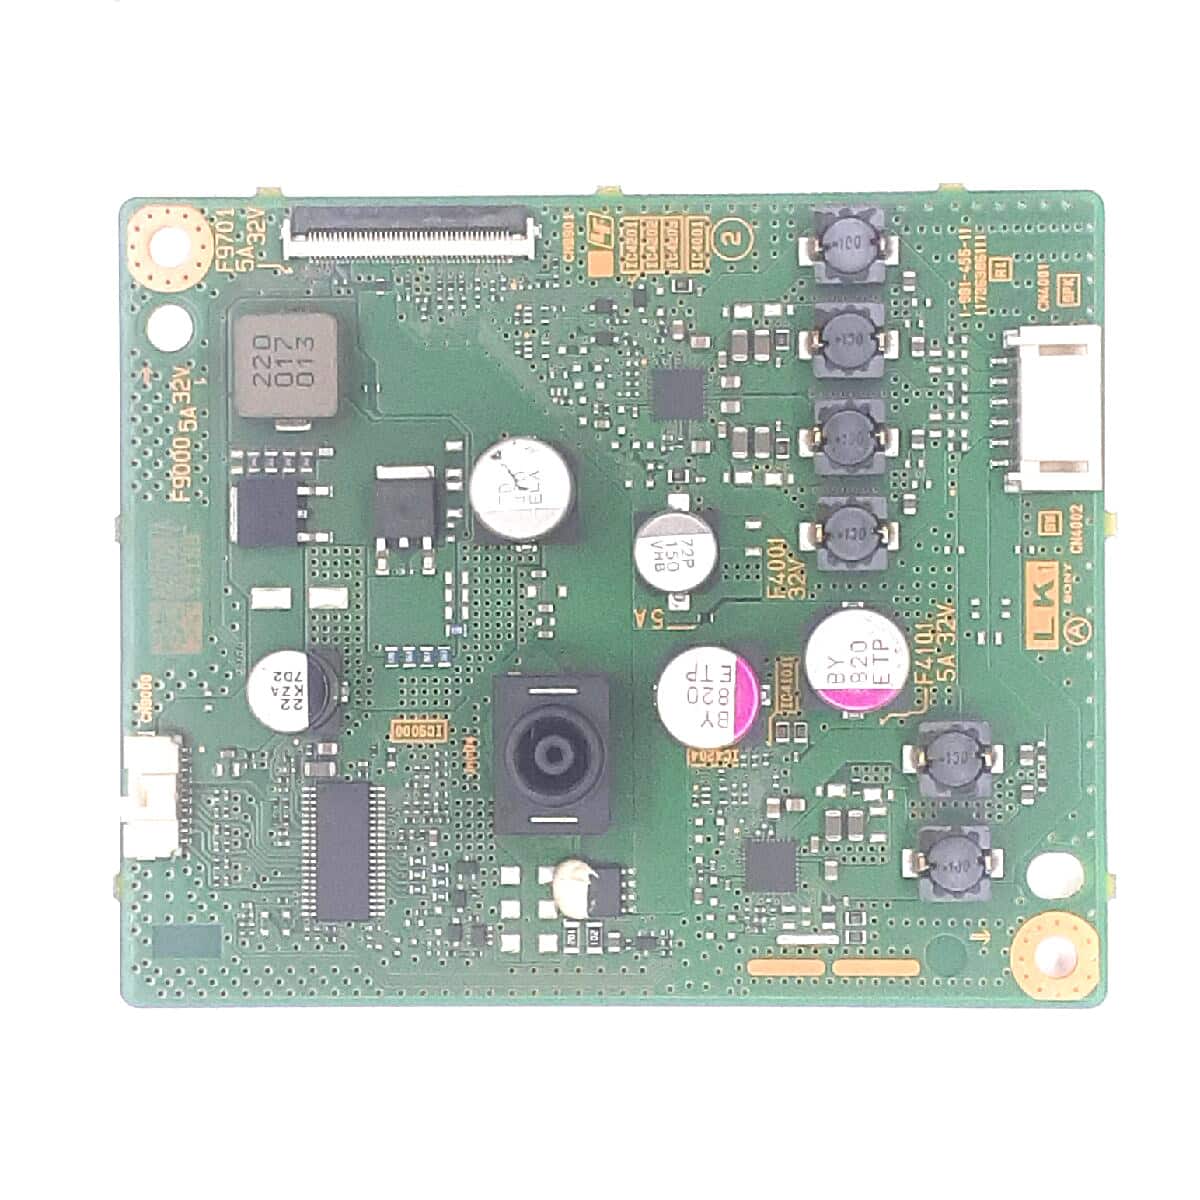 32W672E-SONY-INVERTAR-BOARD-FOR-LED-TV